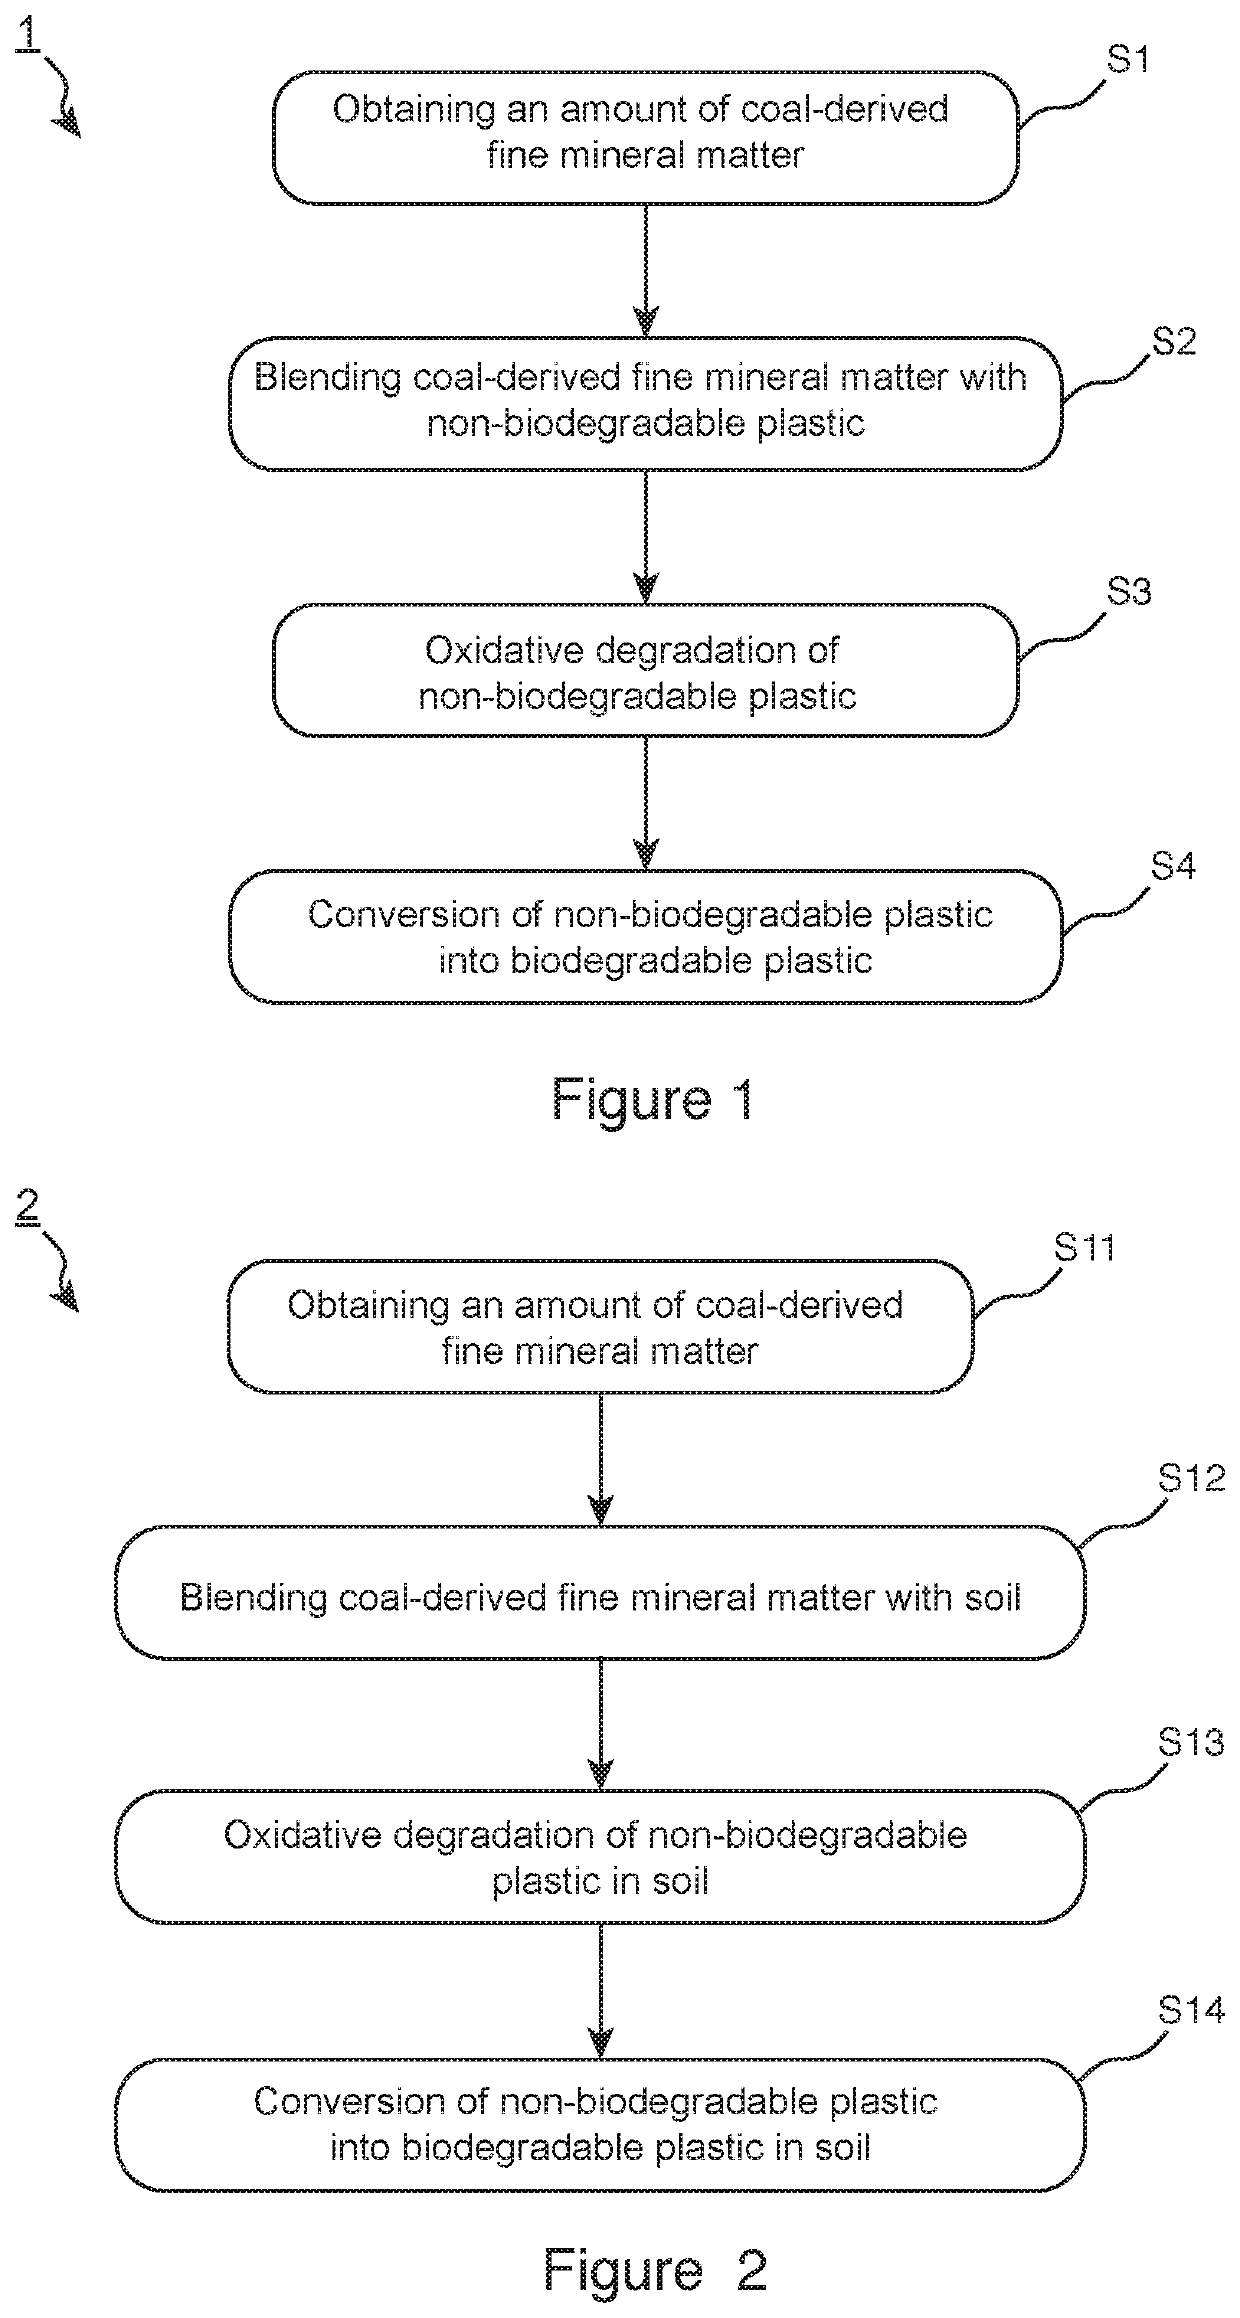 Utilization of Fine Mineral Matter in the Conversion of Non-Biodegradable Plastic and in Remediation of Soils Polluted with Non-Biodegradable Plastic